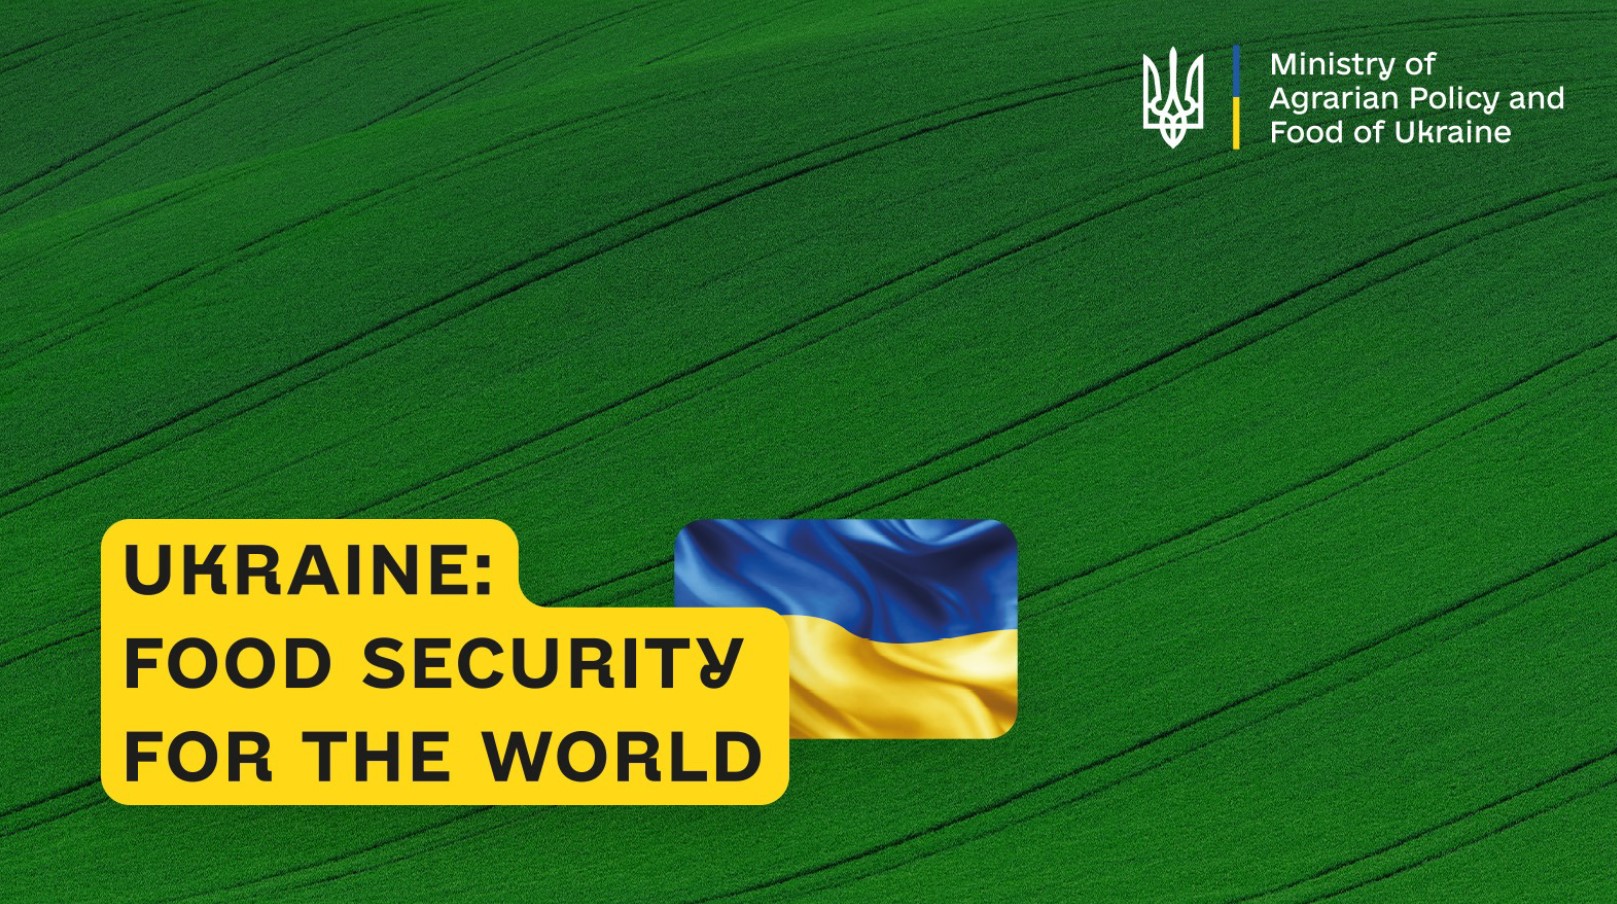 Ukraine:  Food Security For The World